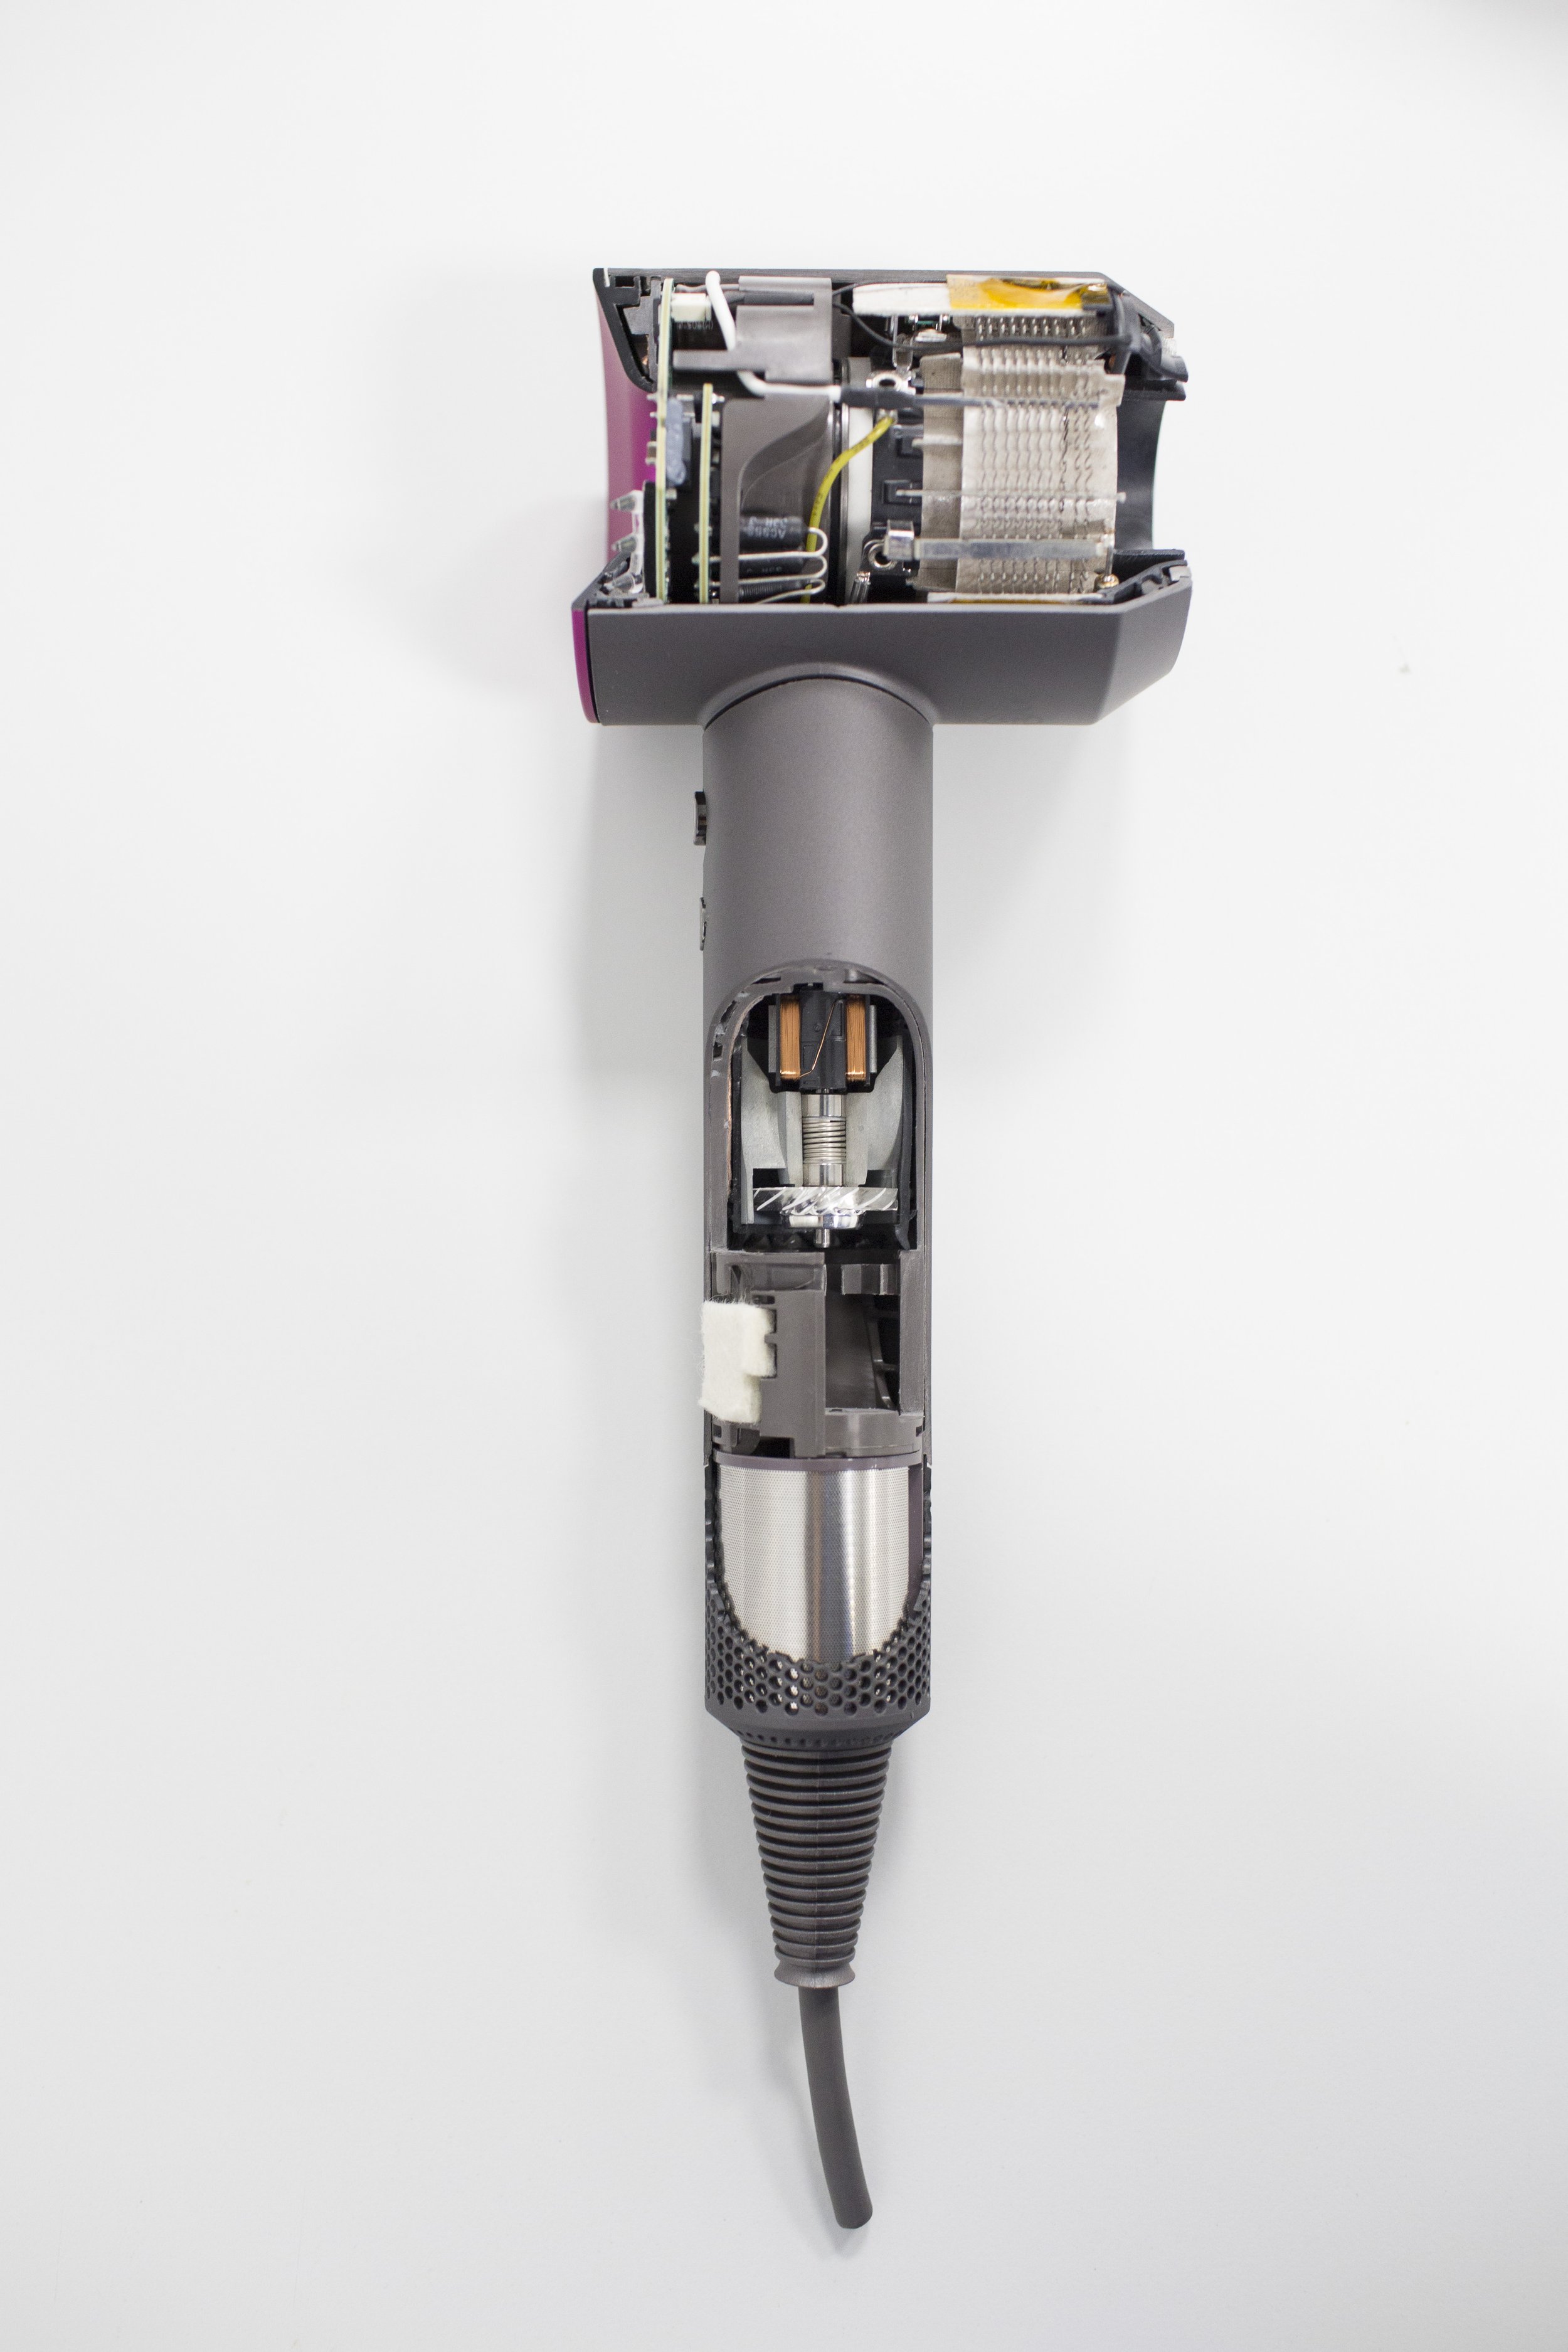   The inner components of a Dyson supersonic hairdryer.   